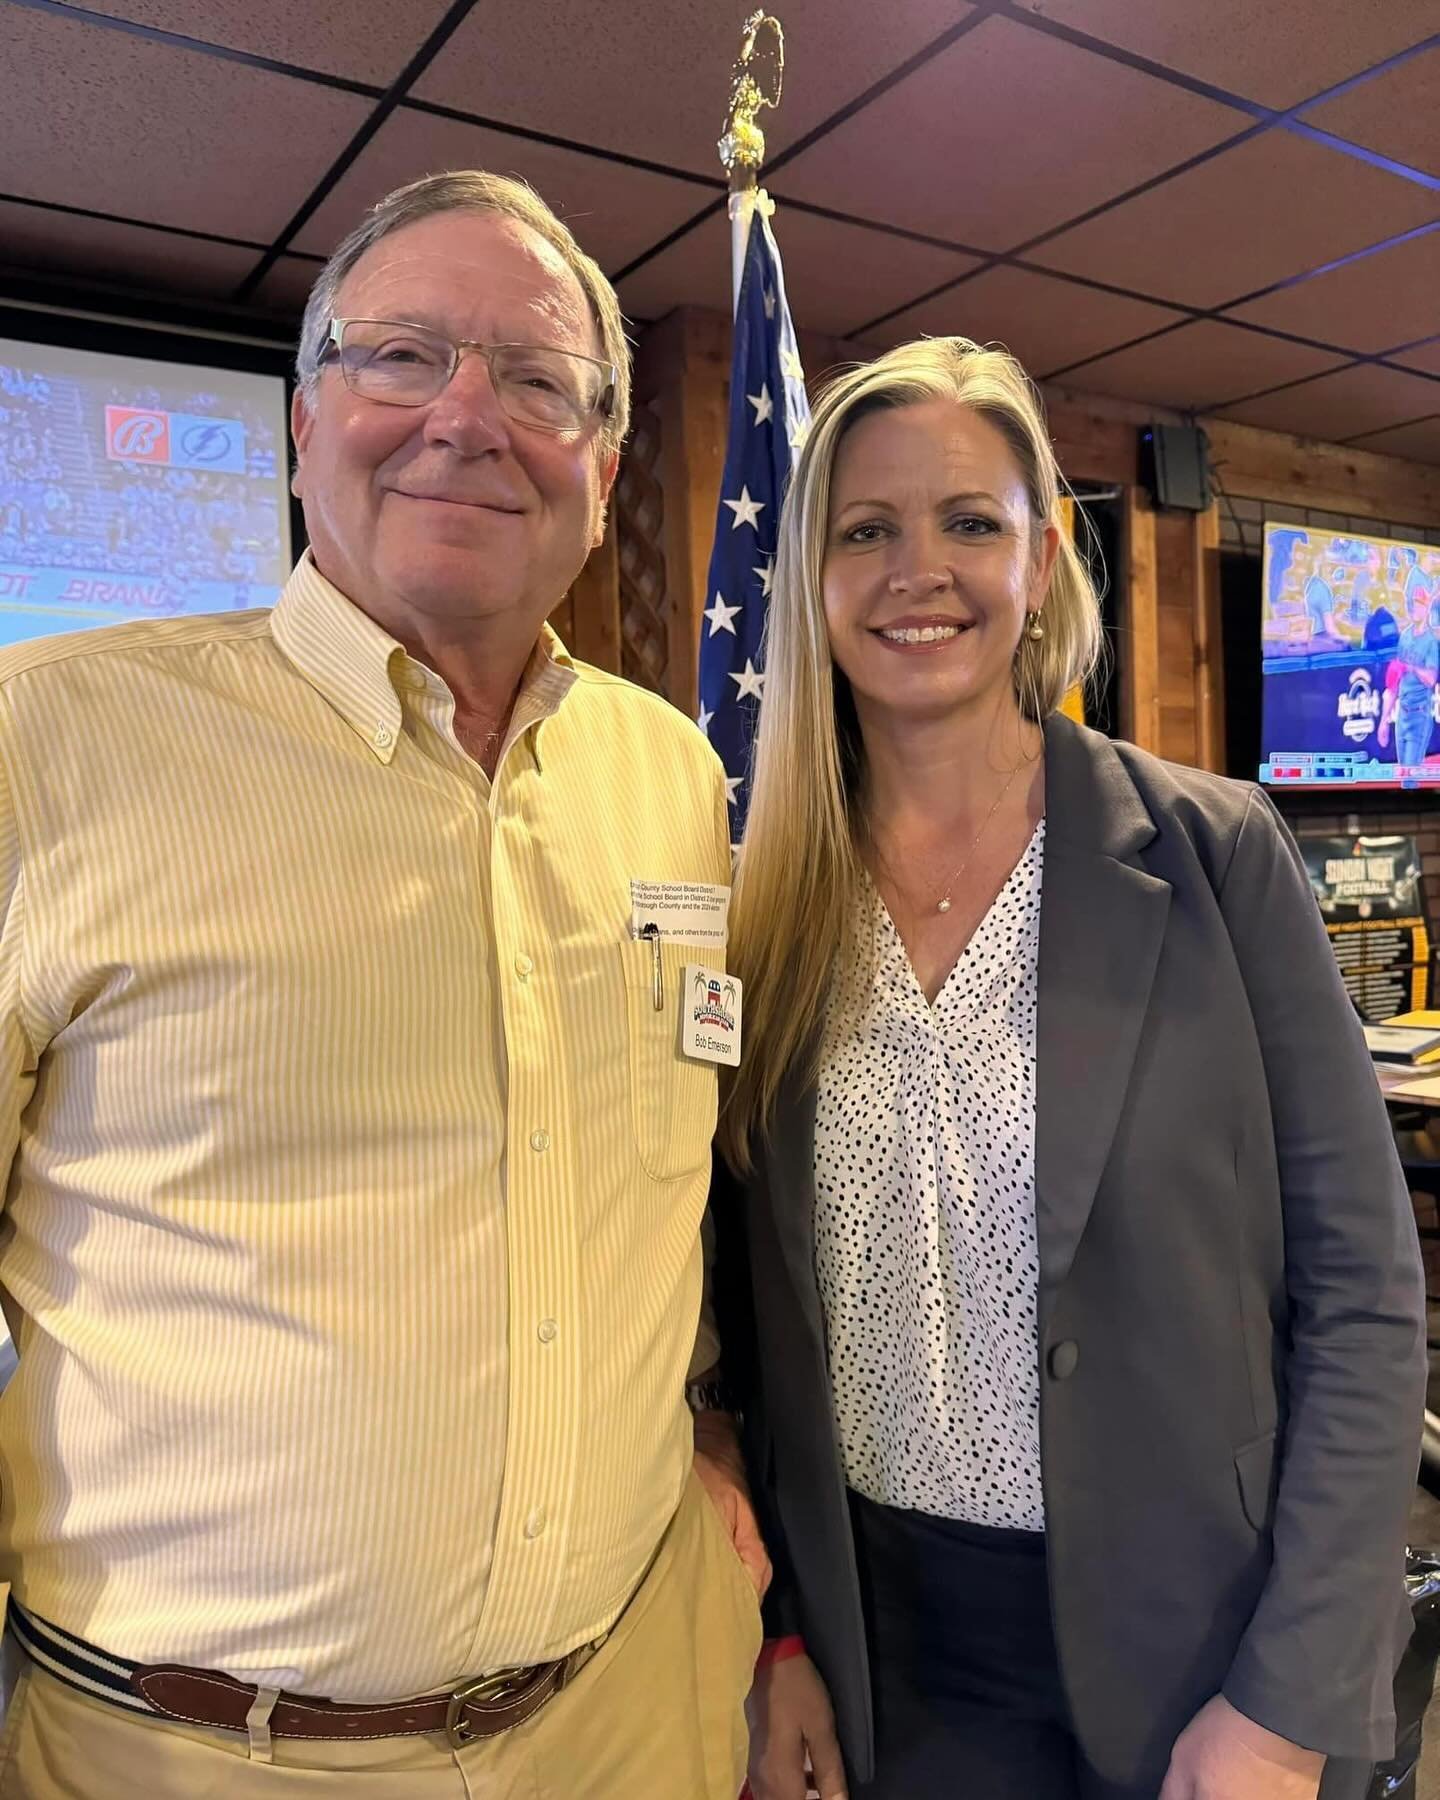 Busy day yesterday which ended with my speaking at the Southshore Republican Club. Thank you to Bob Emerson for the invitation and all of the wonderful members who welcomed me and showed their support for my campaign. 🇺🇸